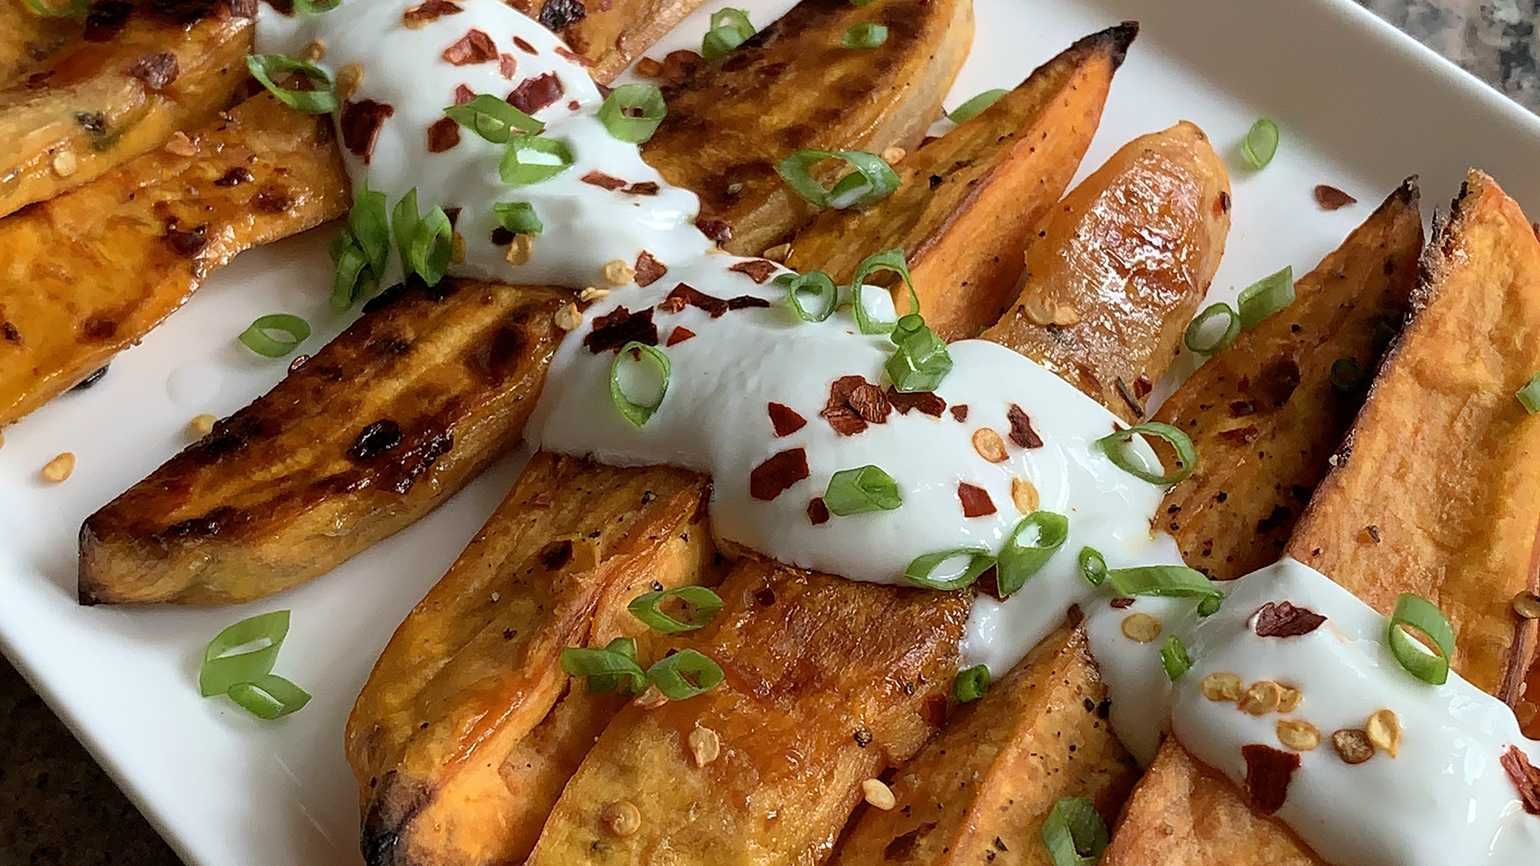 Sam Sifton's Honey-Roasted Sweet Potatoes With Yogurt Sauce (photo by Kevin Eans)